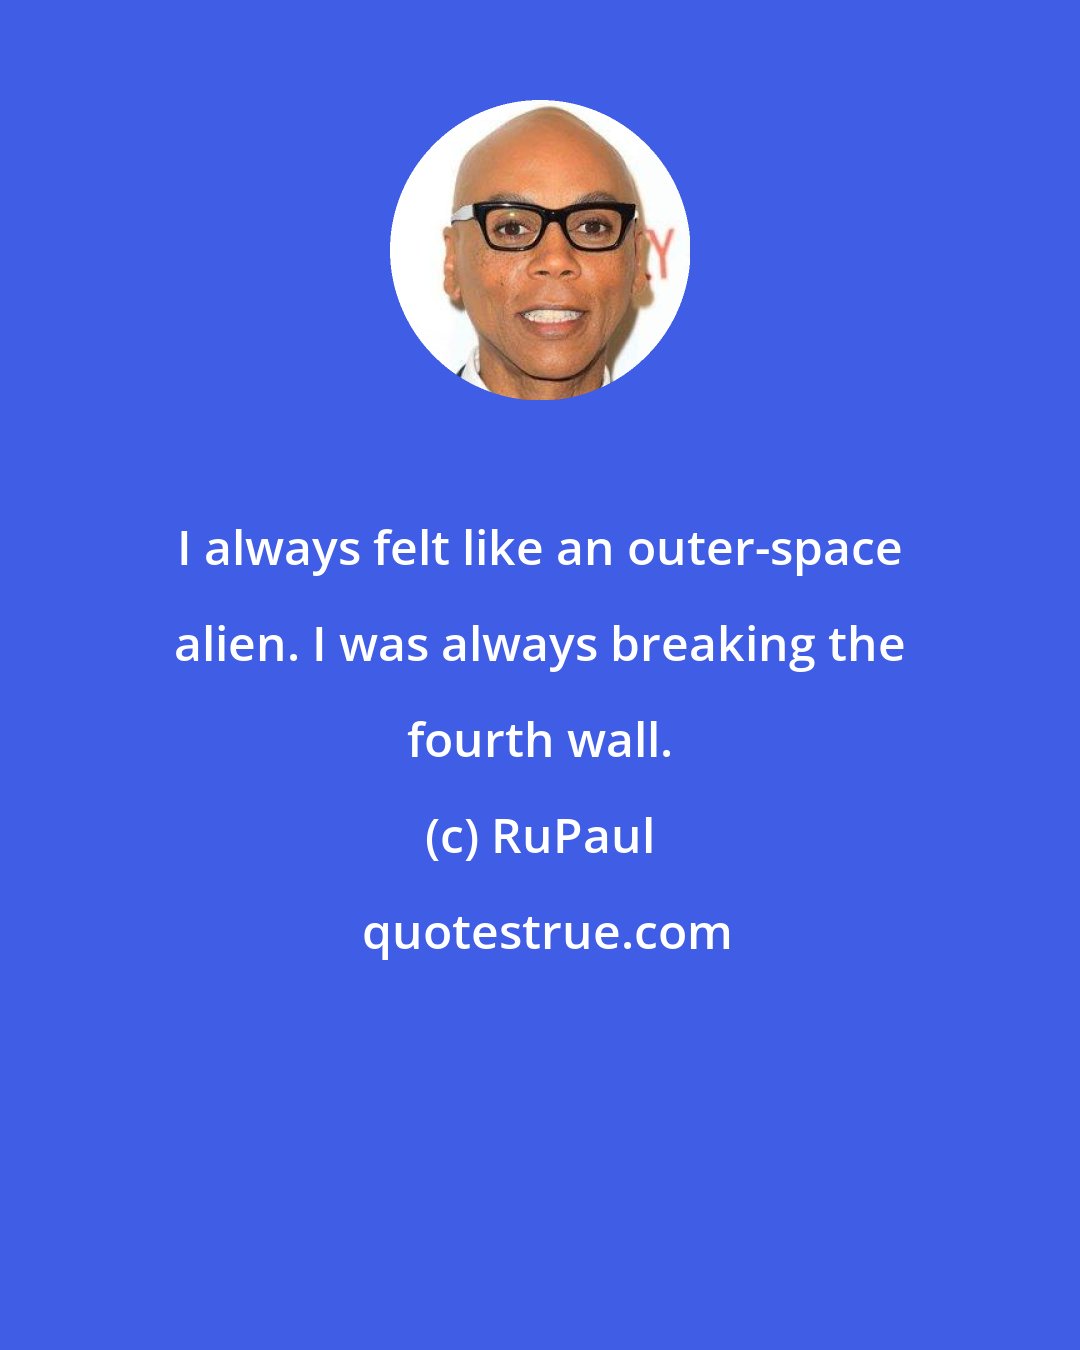 RuPaul: I always felt like an outer-space alien. I was always breaking the fourth wall.